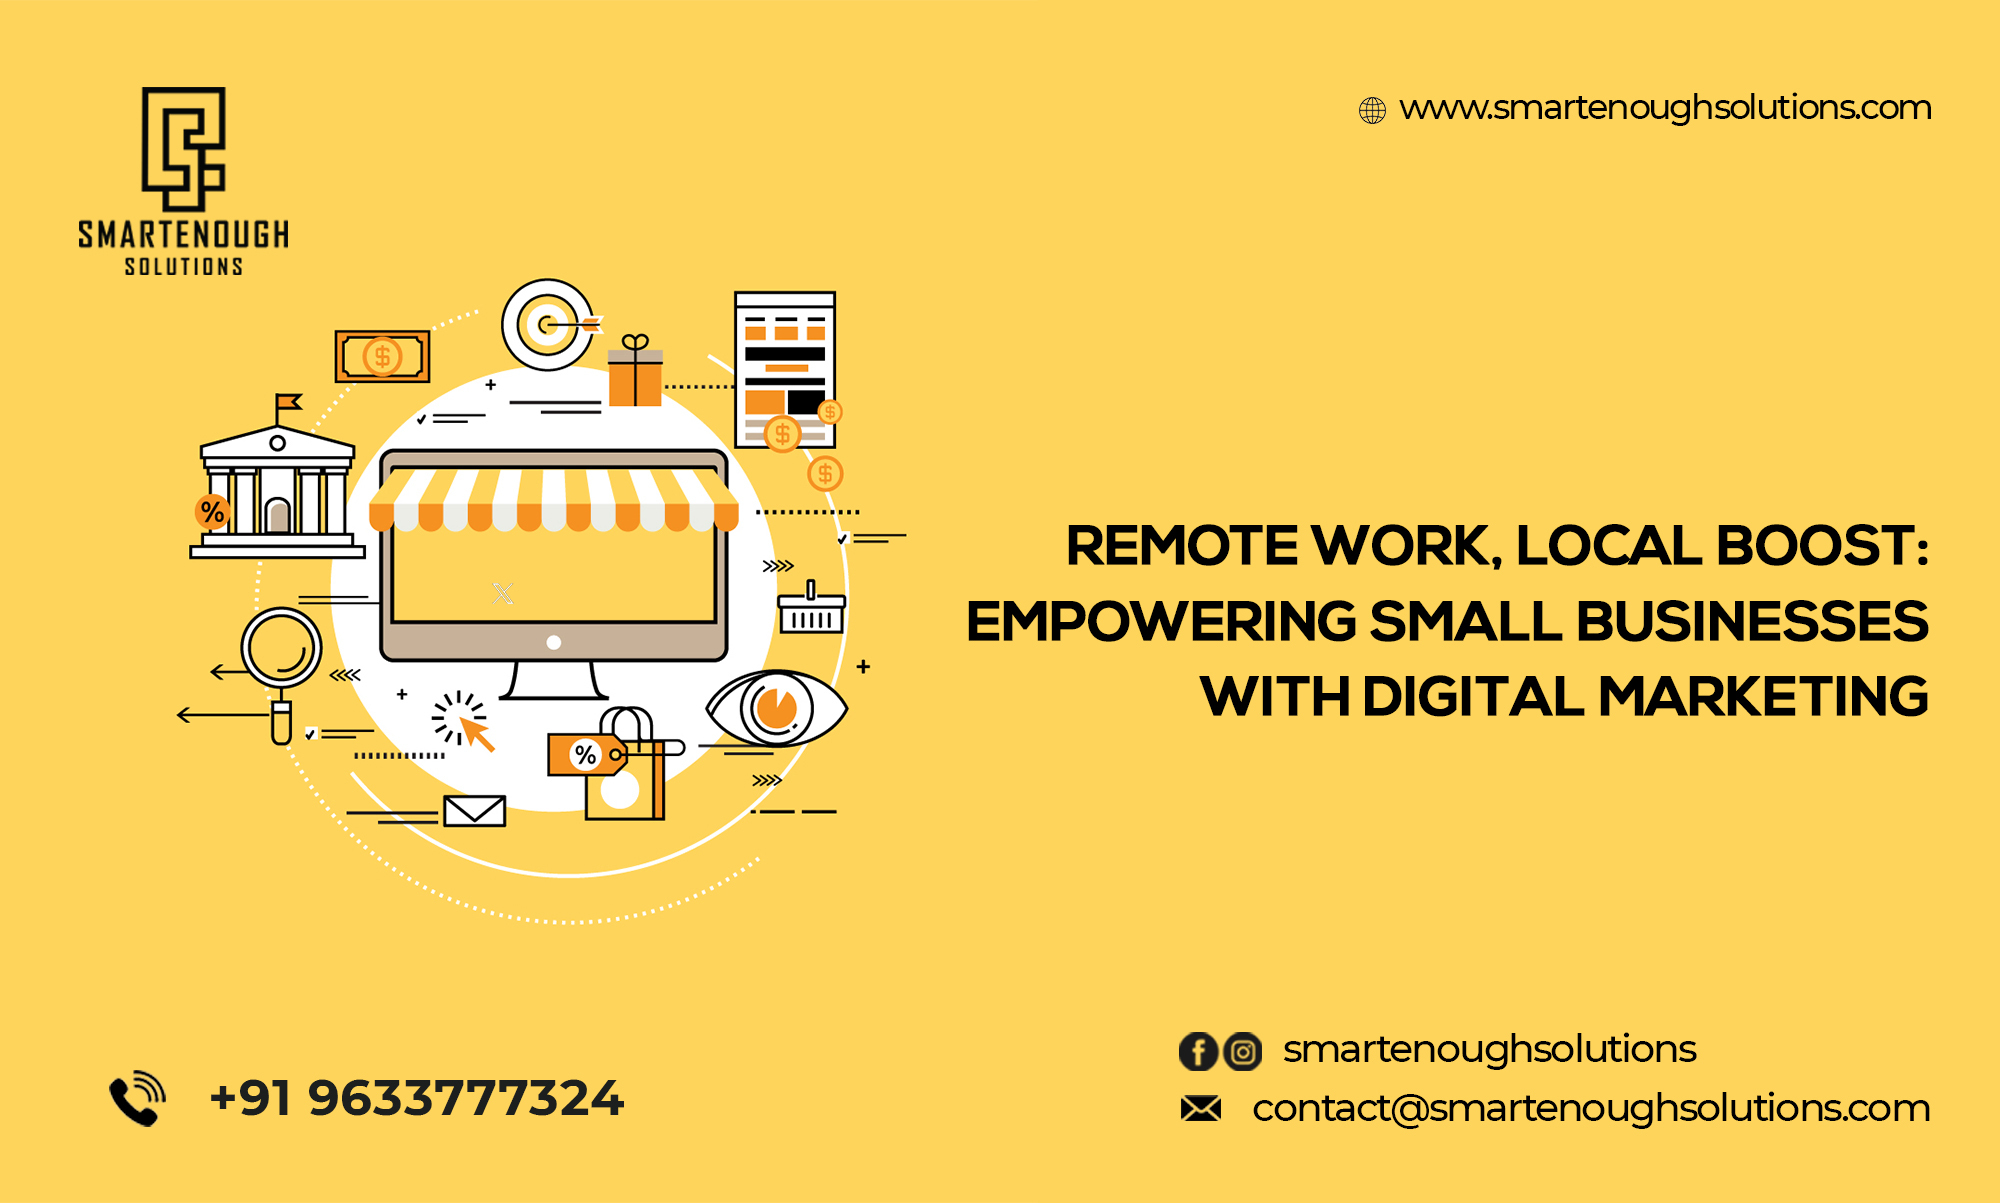 Remote Work, Local Boost: Empowering Small Businesses with Digital Marketing